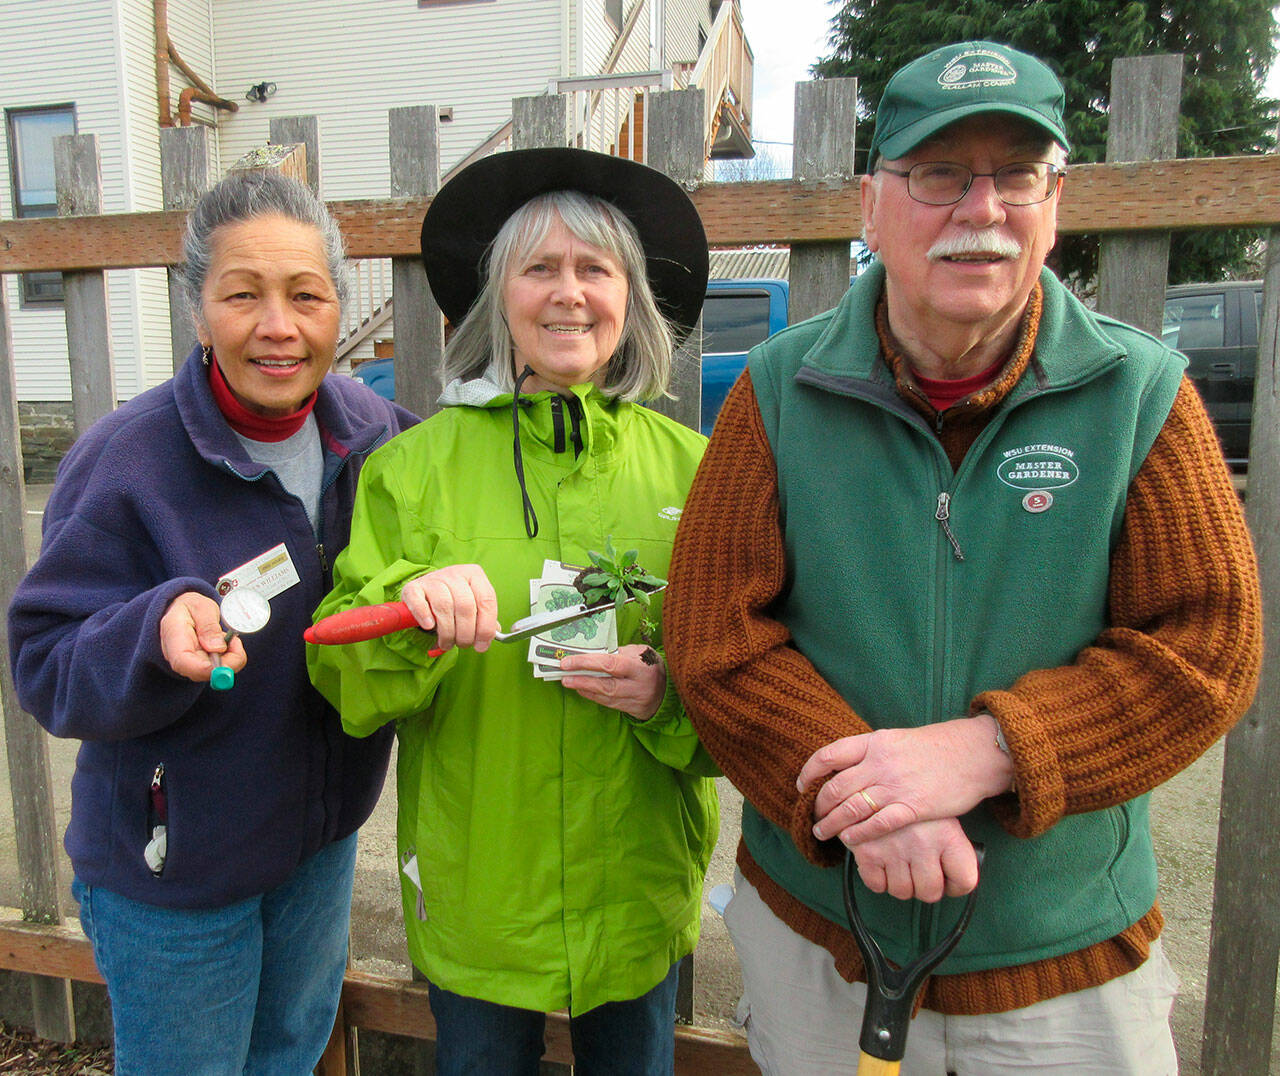 Clallam County Master Gardeners Audreen Williams, Cindy Ericksen and Bob Cain will teach local gardeners how to grow vegetables successfully on the North Olympic Peninsula from 10:30 a.m.-noon on Saturday, March 19, on Zoom. Submitted photo